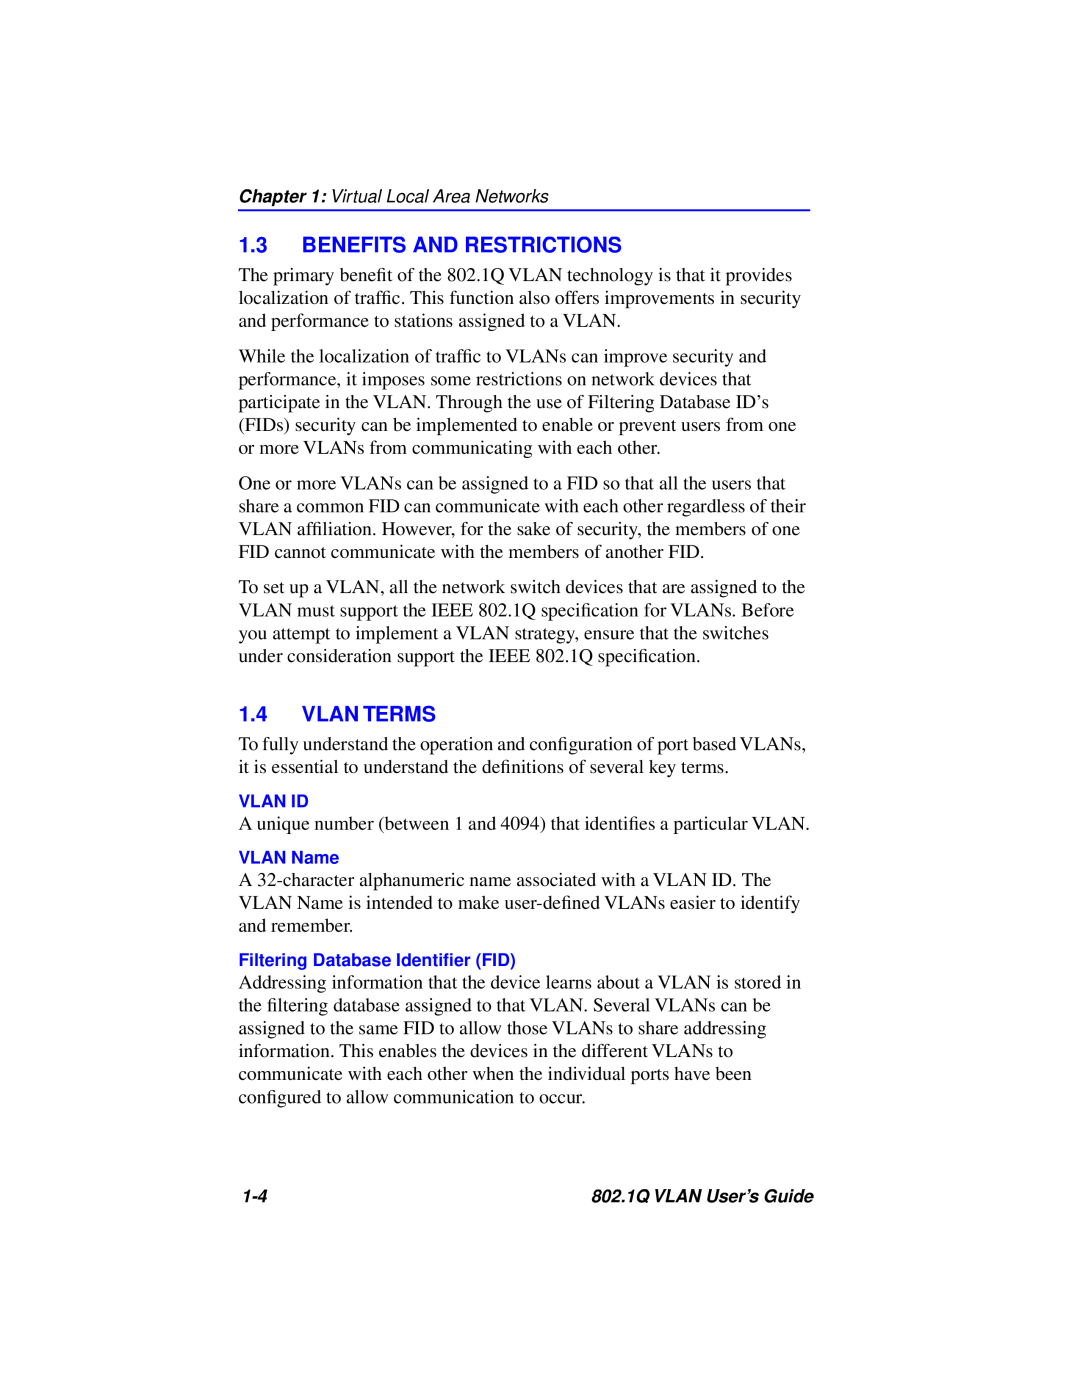 Cabletron Systems 802.1Q manual Benefits And Restrictions, Vlan Terms 